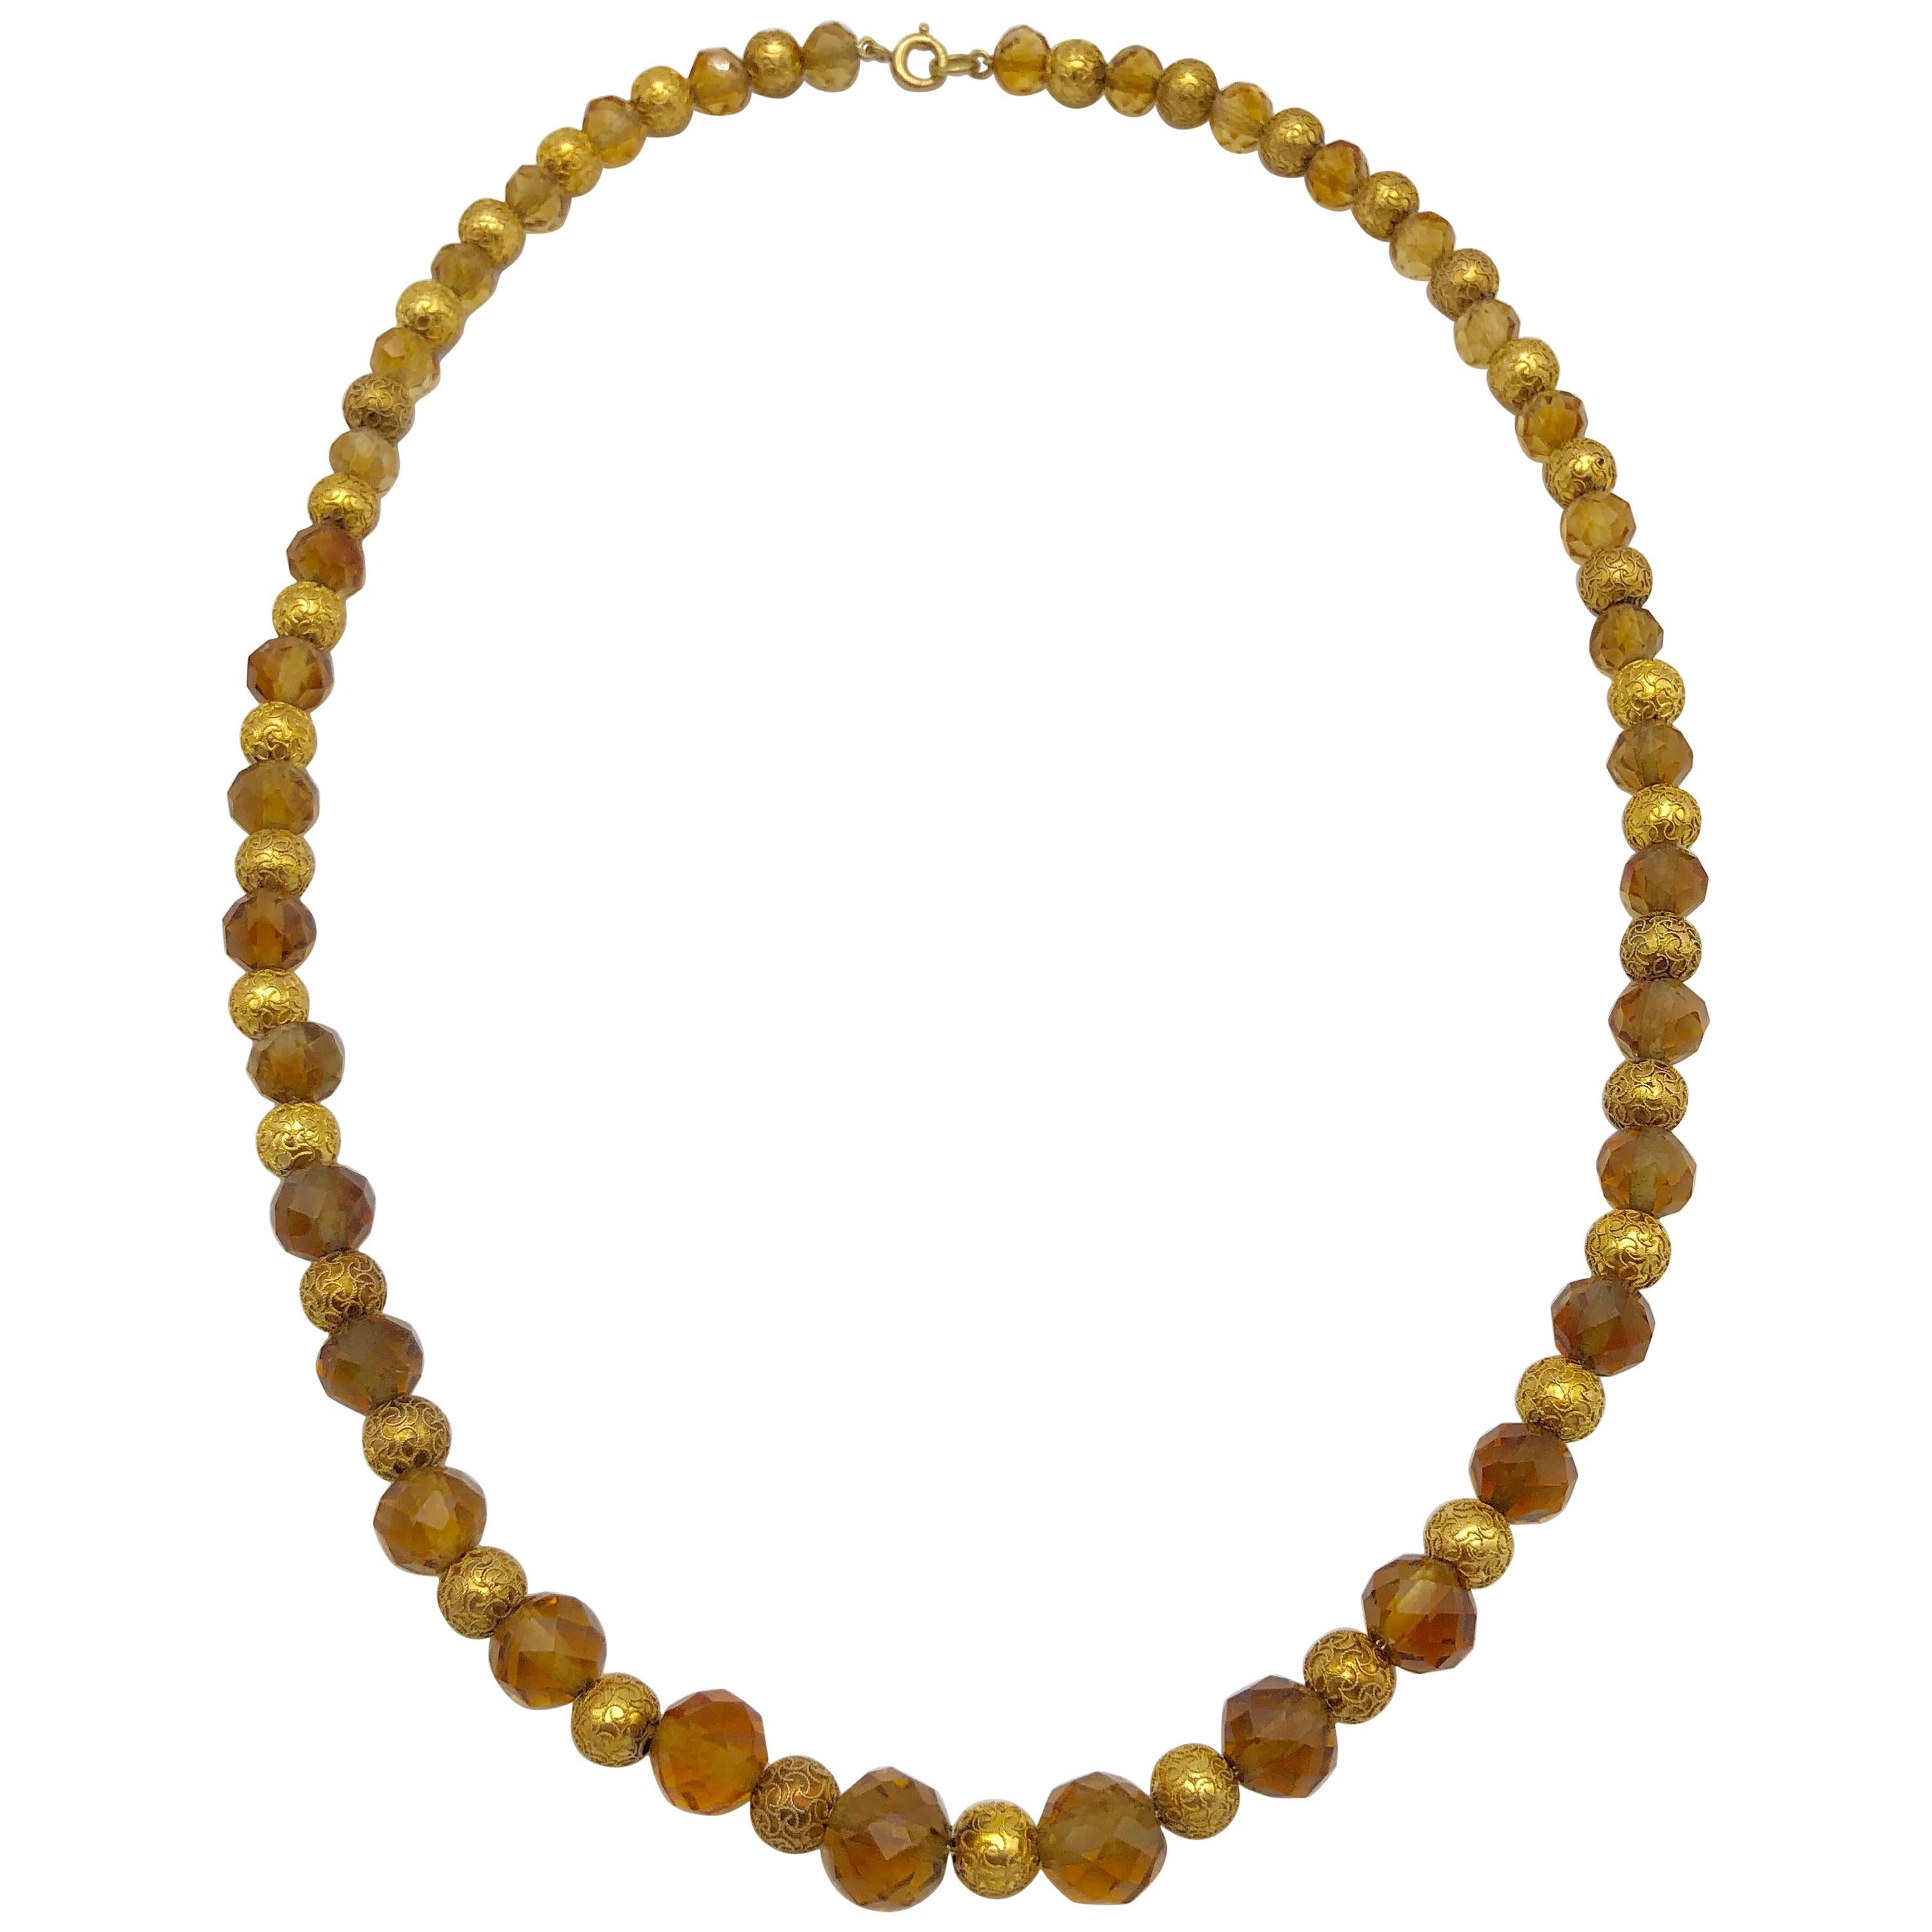 Antique Necklace Gold Citrine Beads